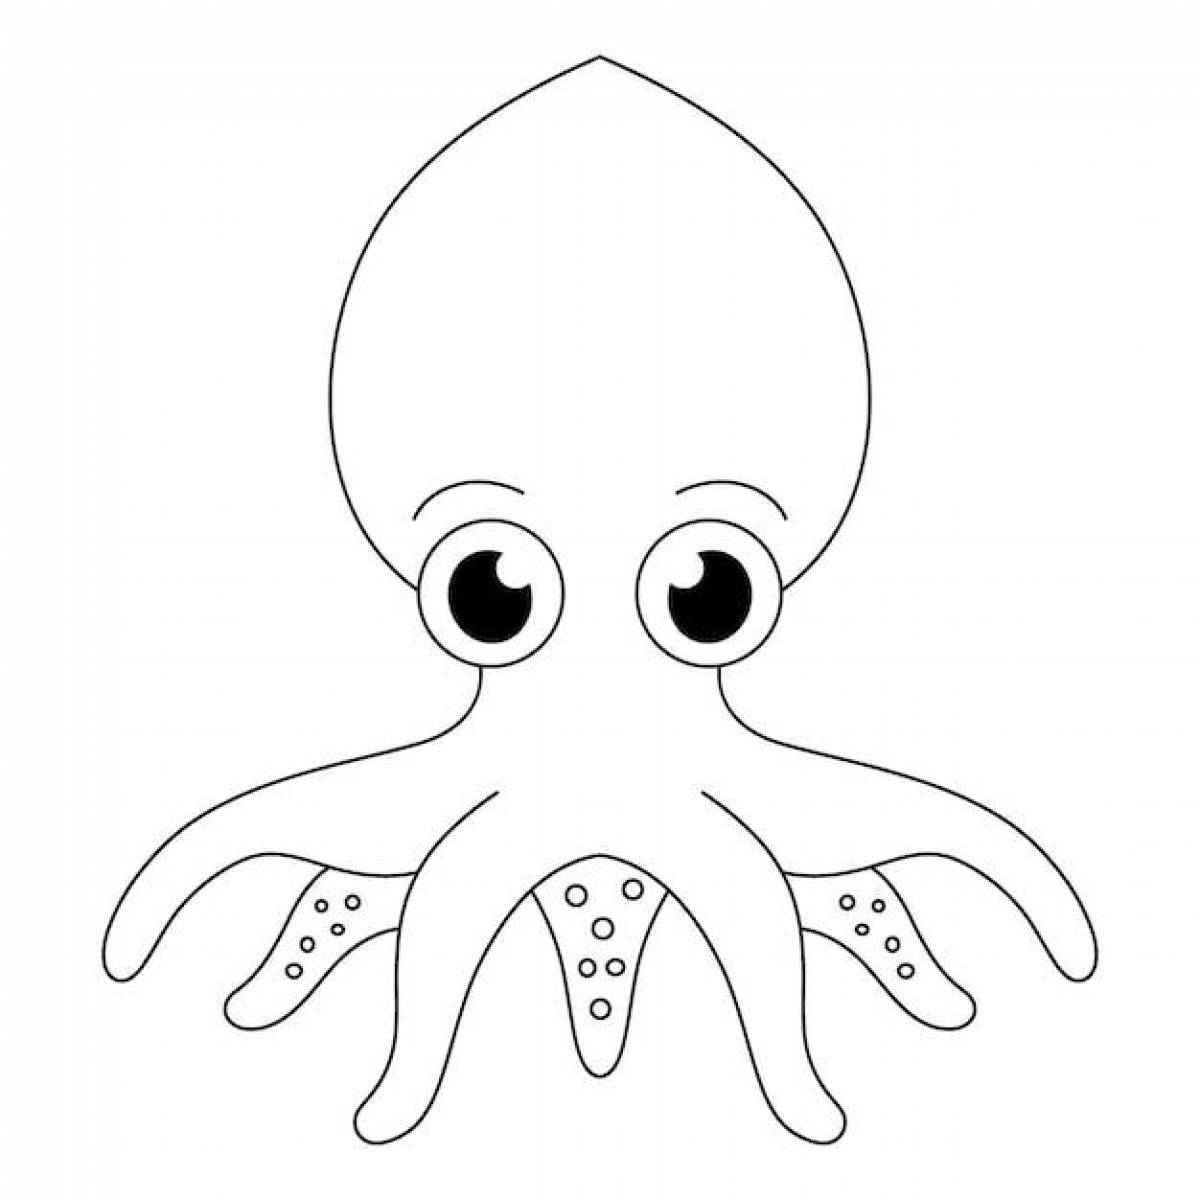 Amazing octopus coloring book for kids